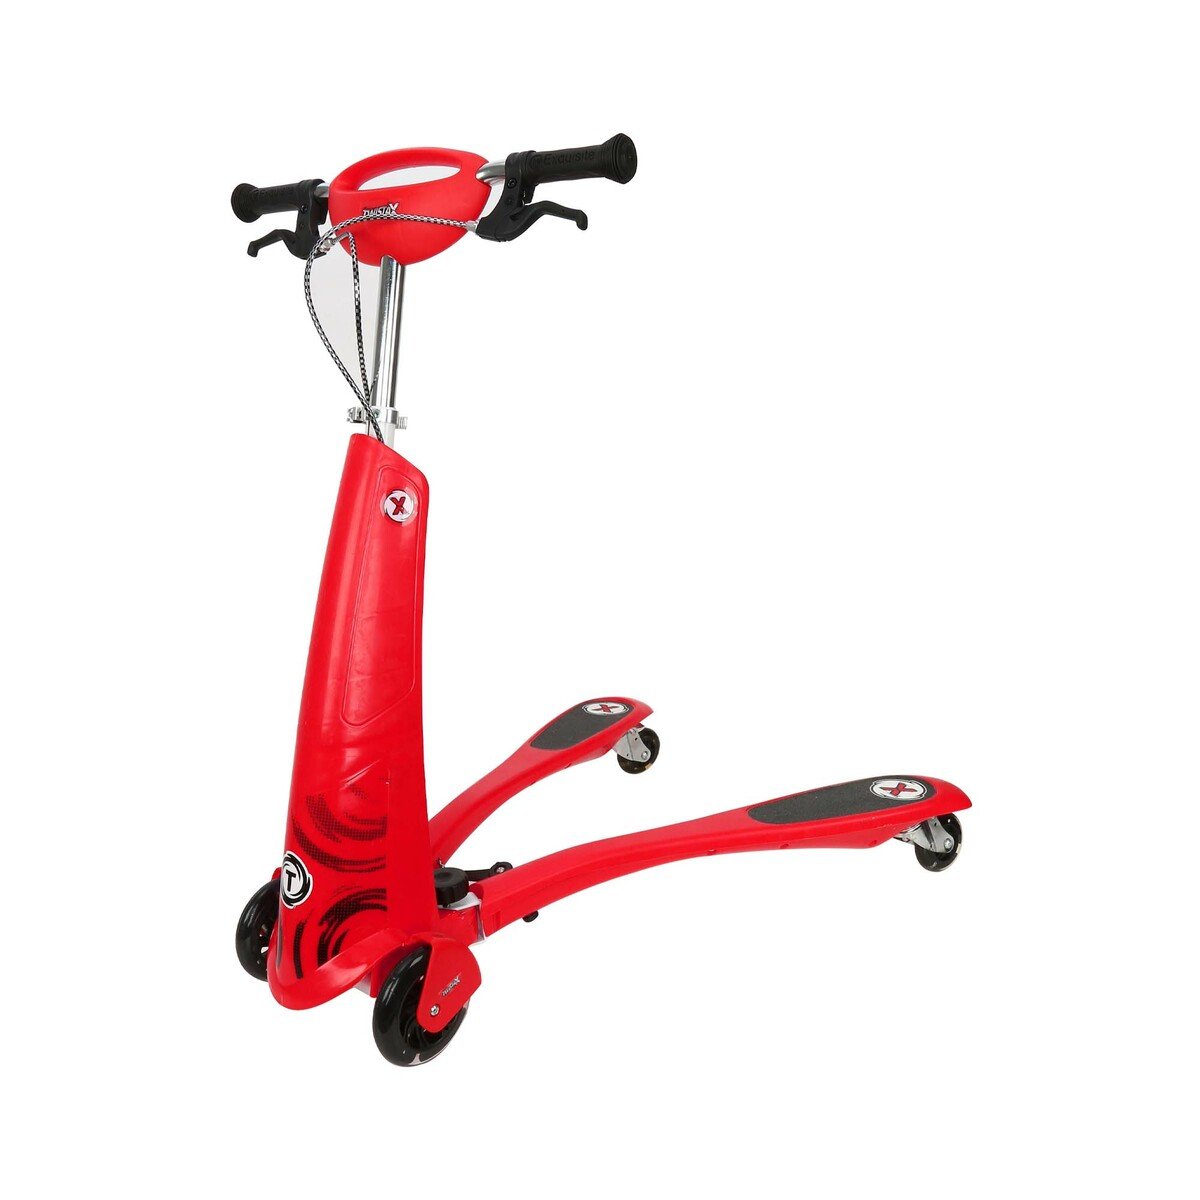 Skid Fusion Flicker Scooter W-206 Color Assorted